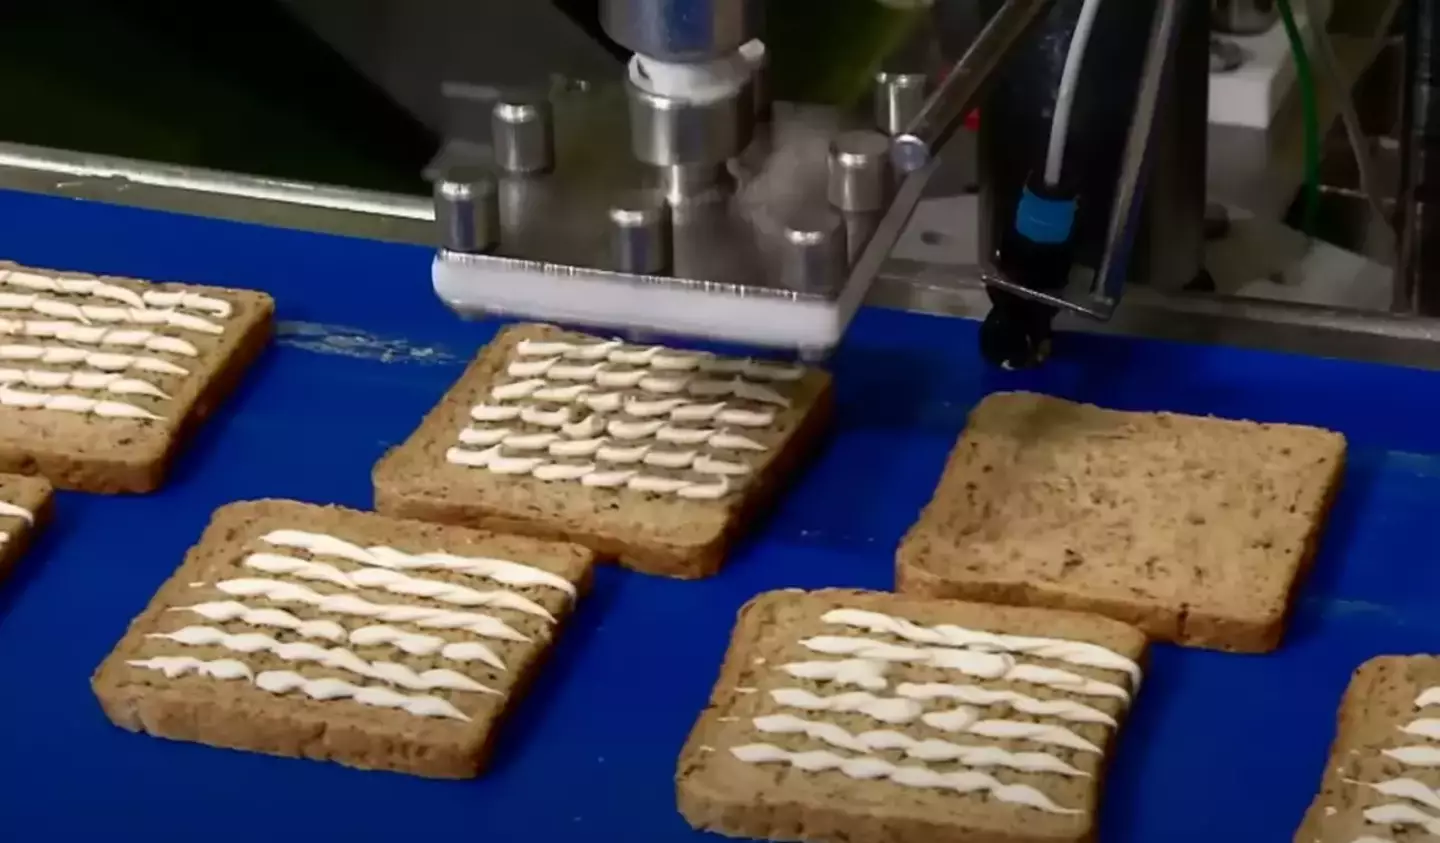 The video also showed how machinery can speed up the process of sandwich making tasks like adding mayonnaise.